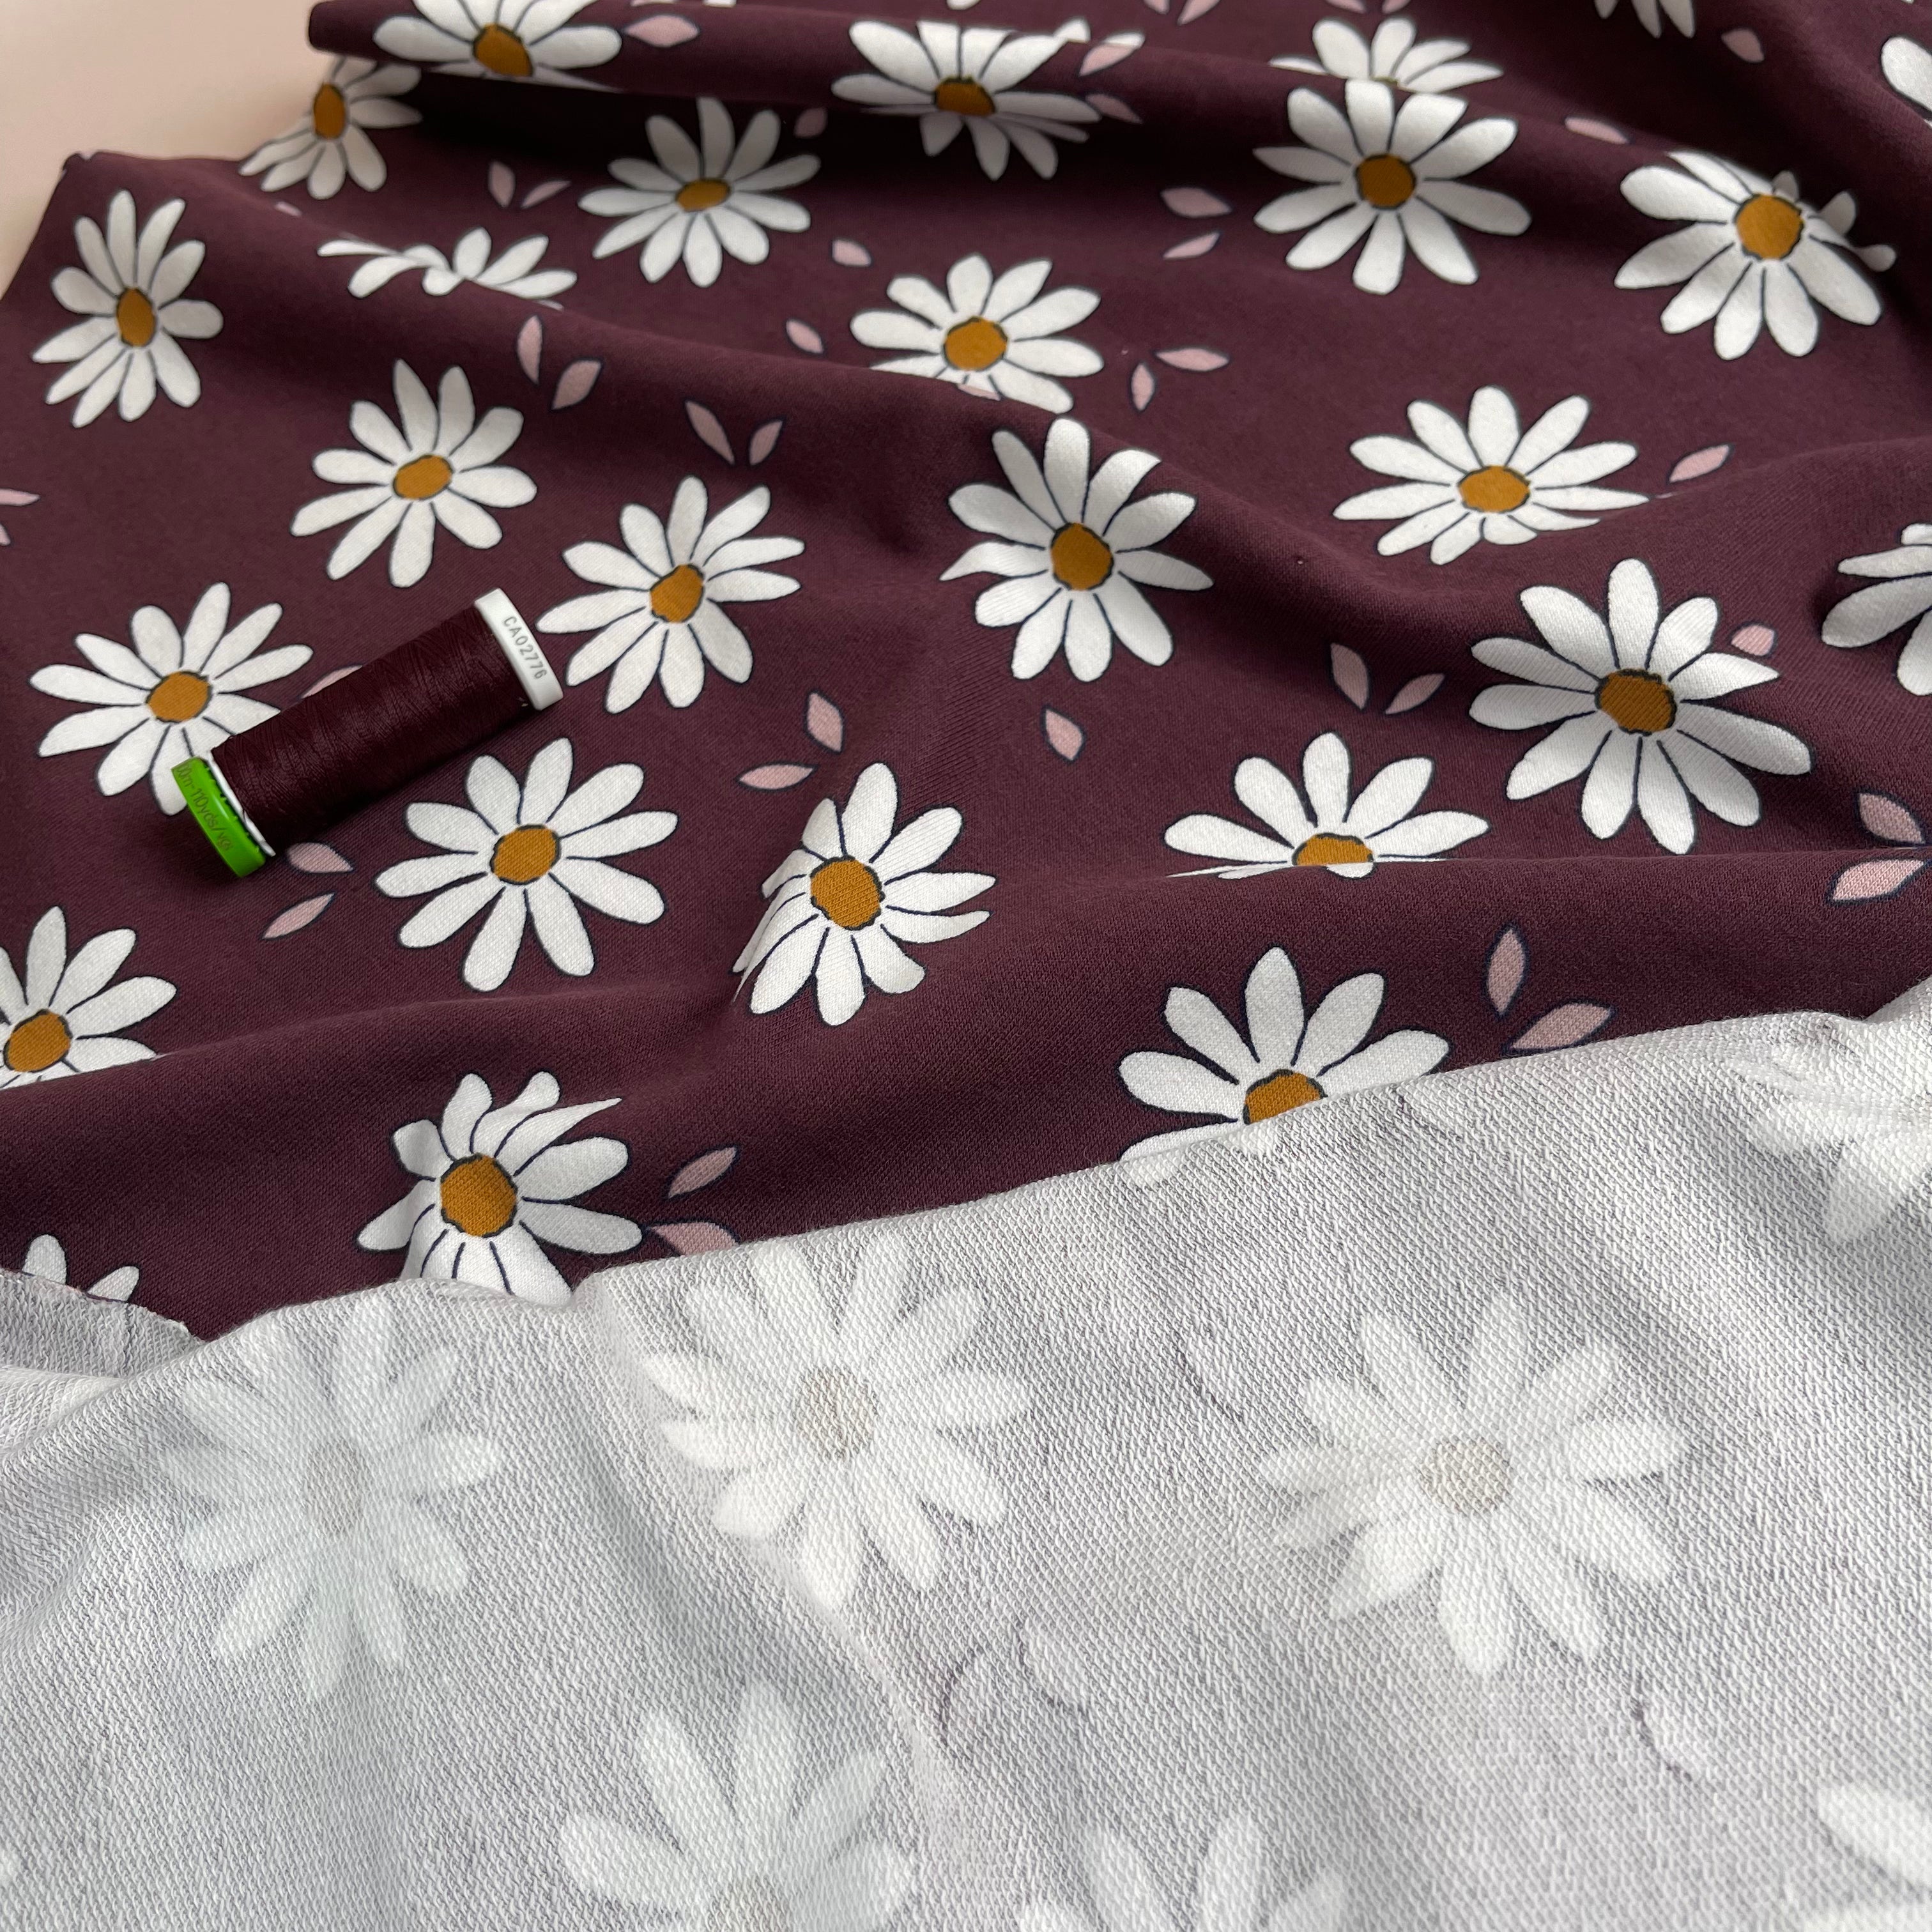 Daisies on Plum Cotton French Terry Fabric